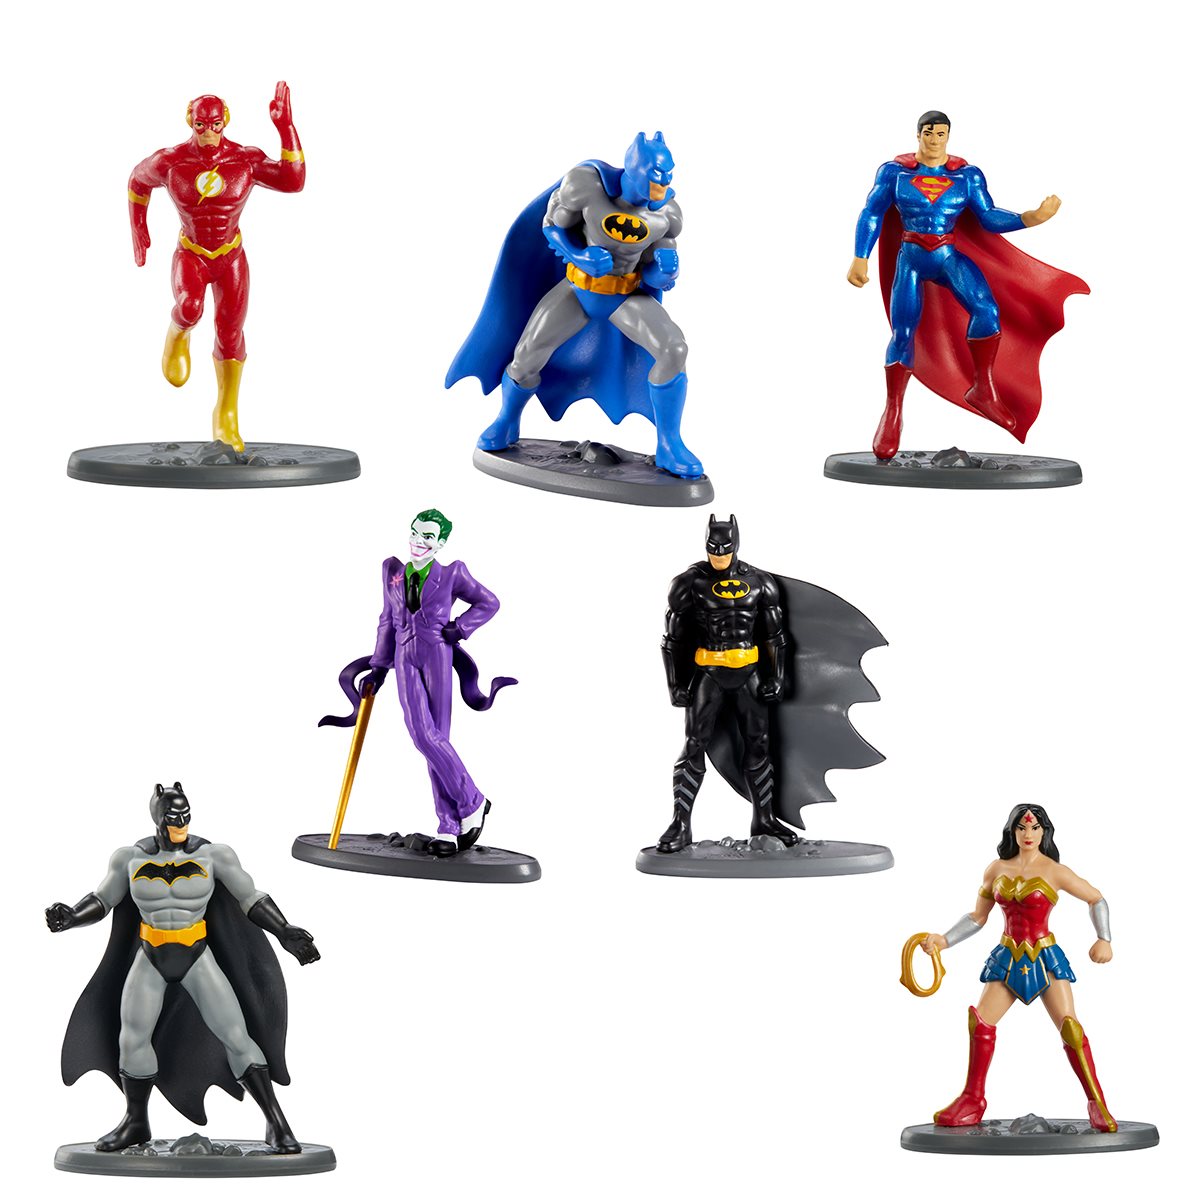 New 10 PACKS Justice League Mighty Minis Series 1 Blind Bag Figures DC Official 